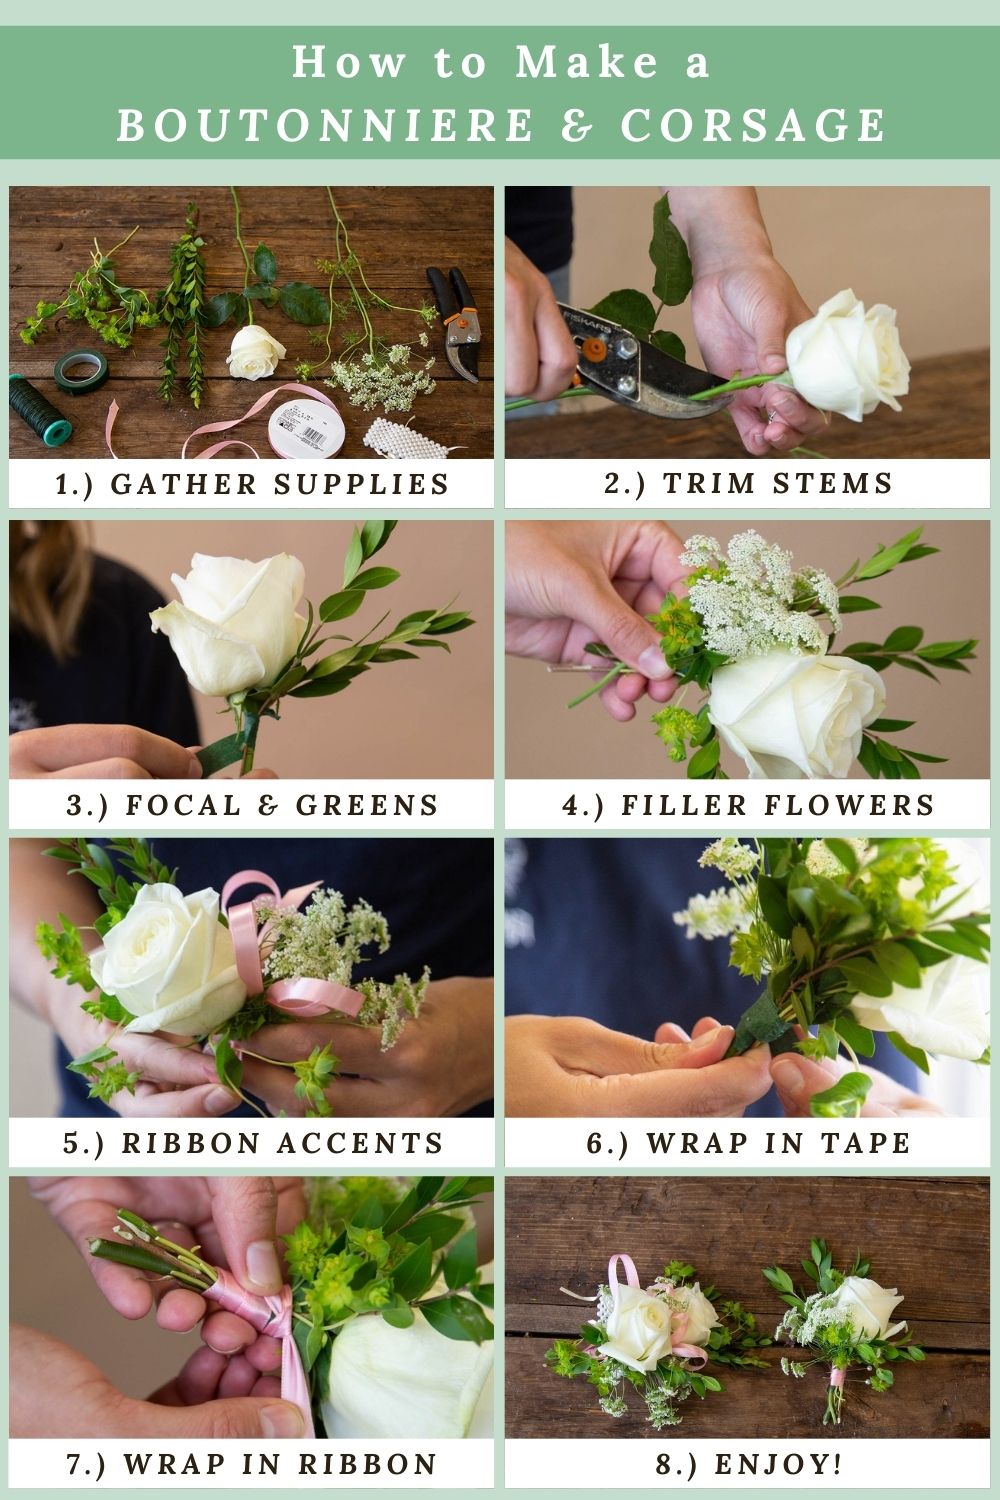 How To Make A Boutonniere And Corsage: A DIY Tutorial - Fiftyflowers